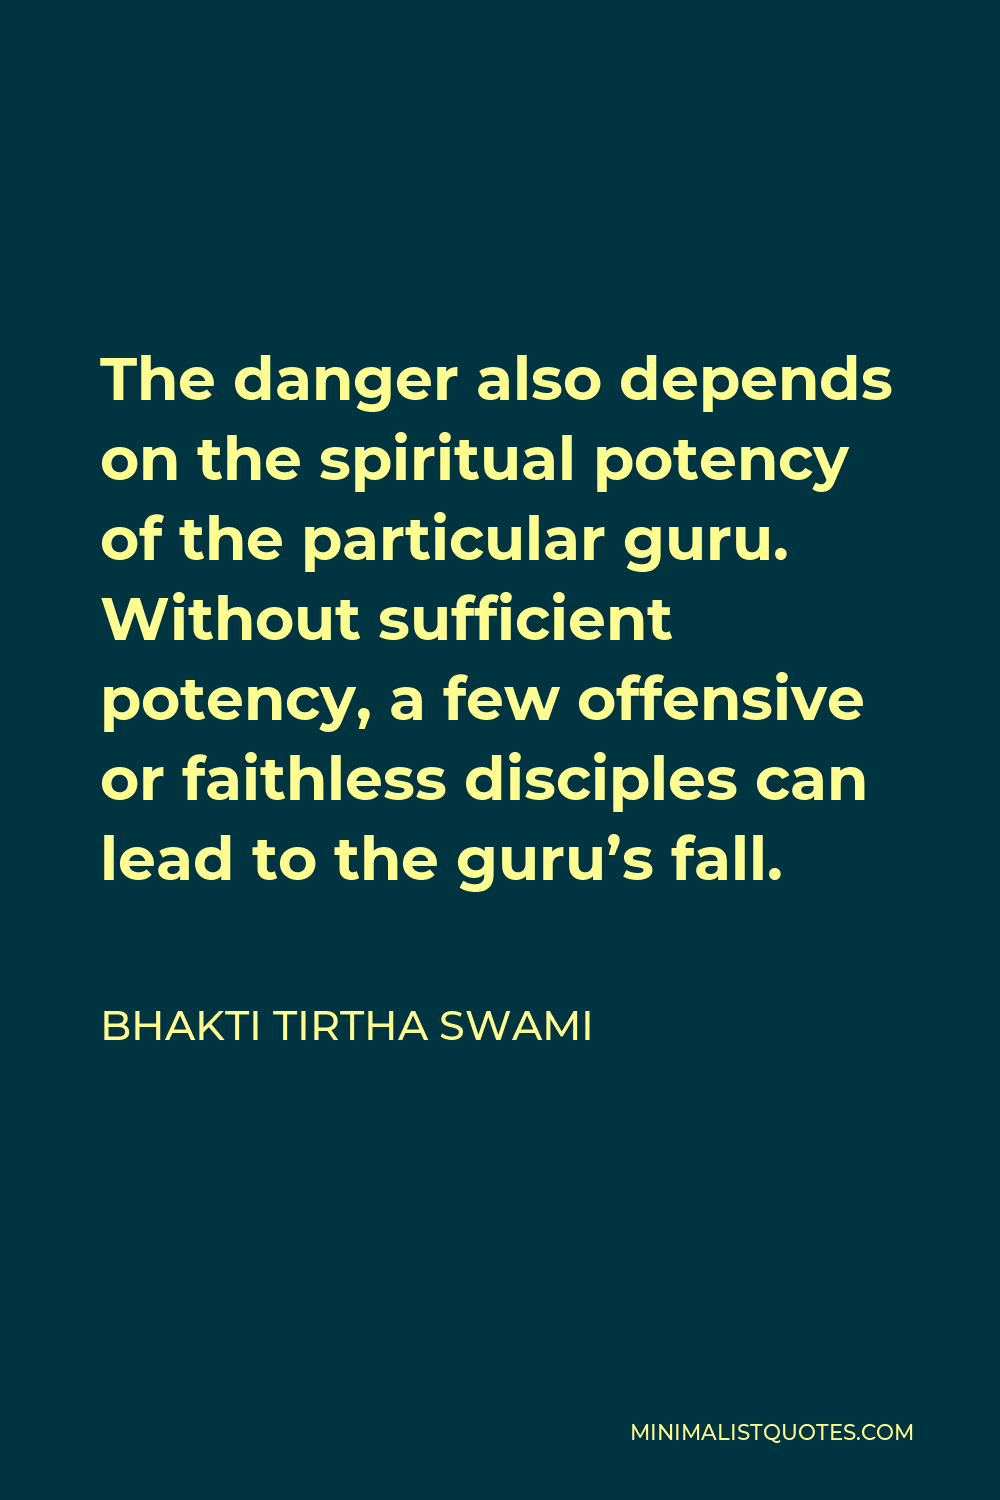 Bhakti Tirtha Swami Quote - The danger also depends on the spiritual potency of the particular guru. Without sufficient potency, a few offensive or faithless disciples can lead to the guru’s fall.